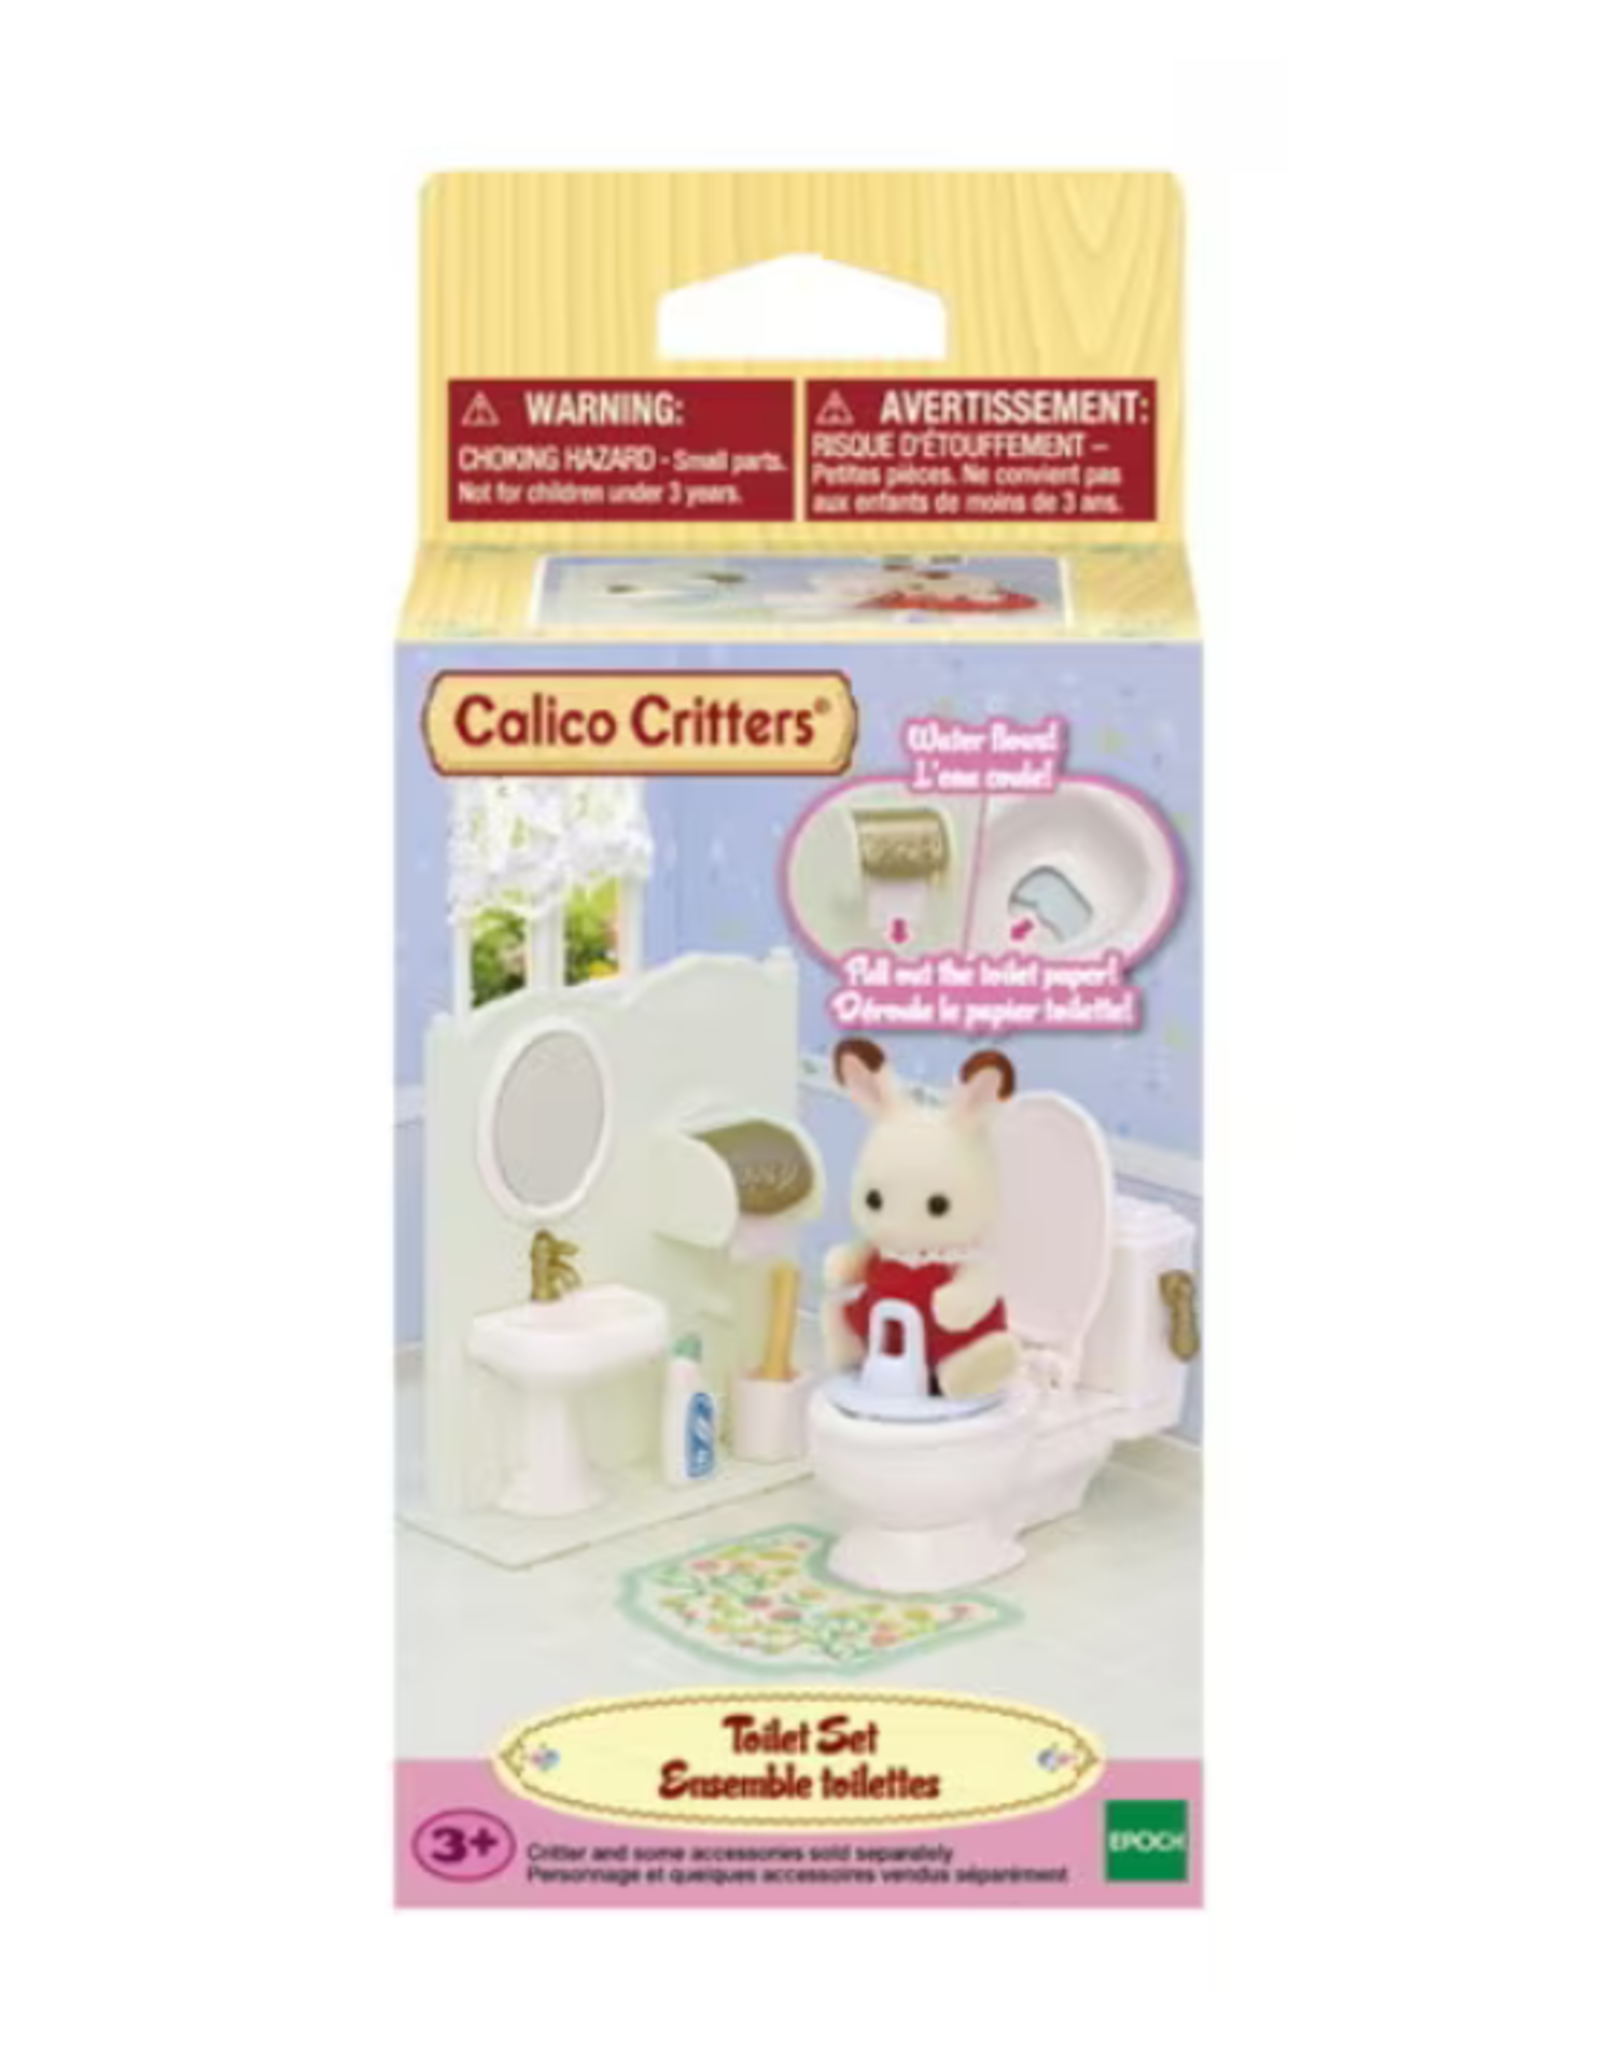 Calico Critters Calico Critters - Toilet Set